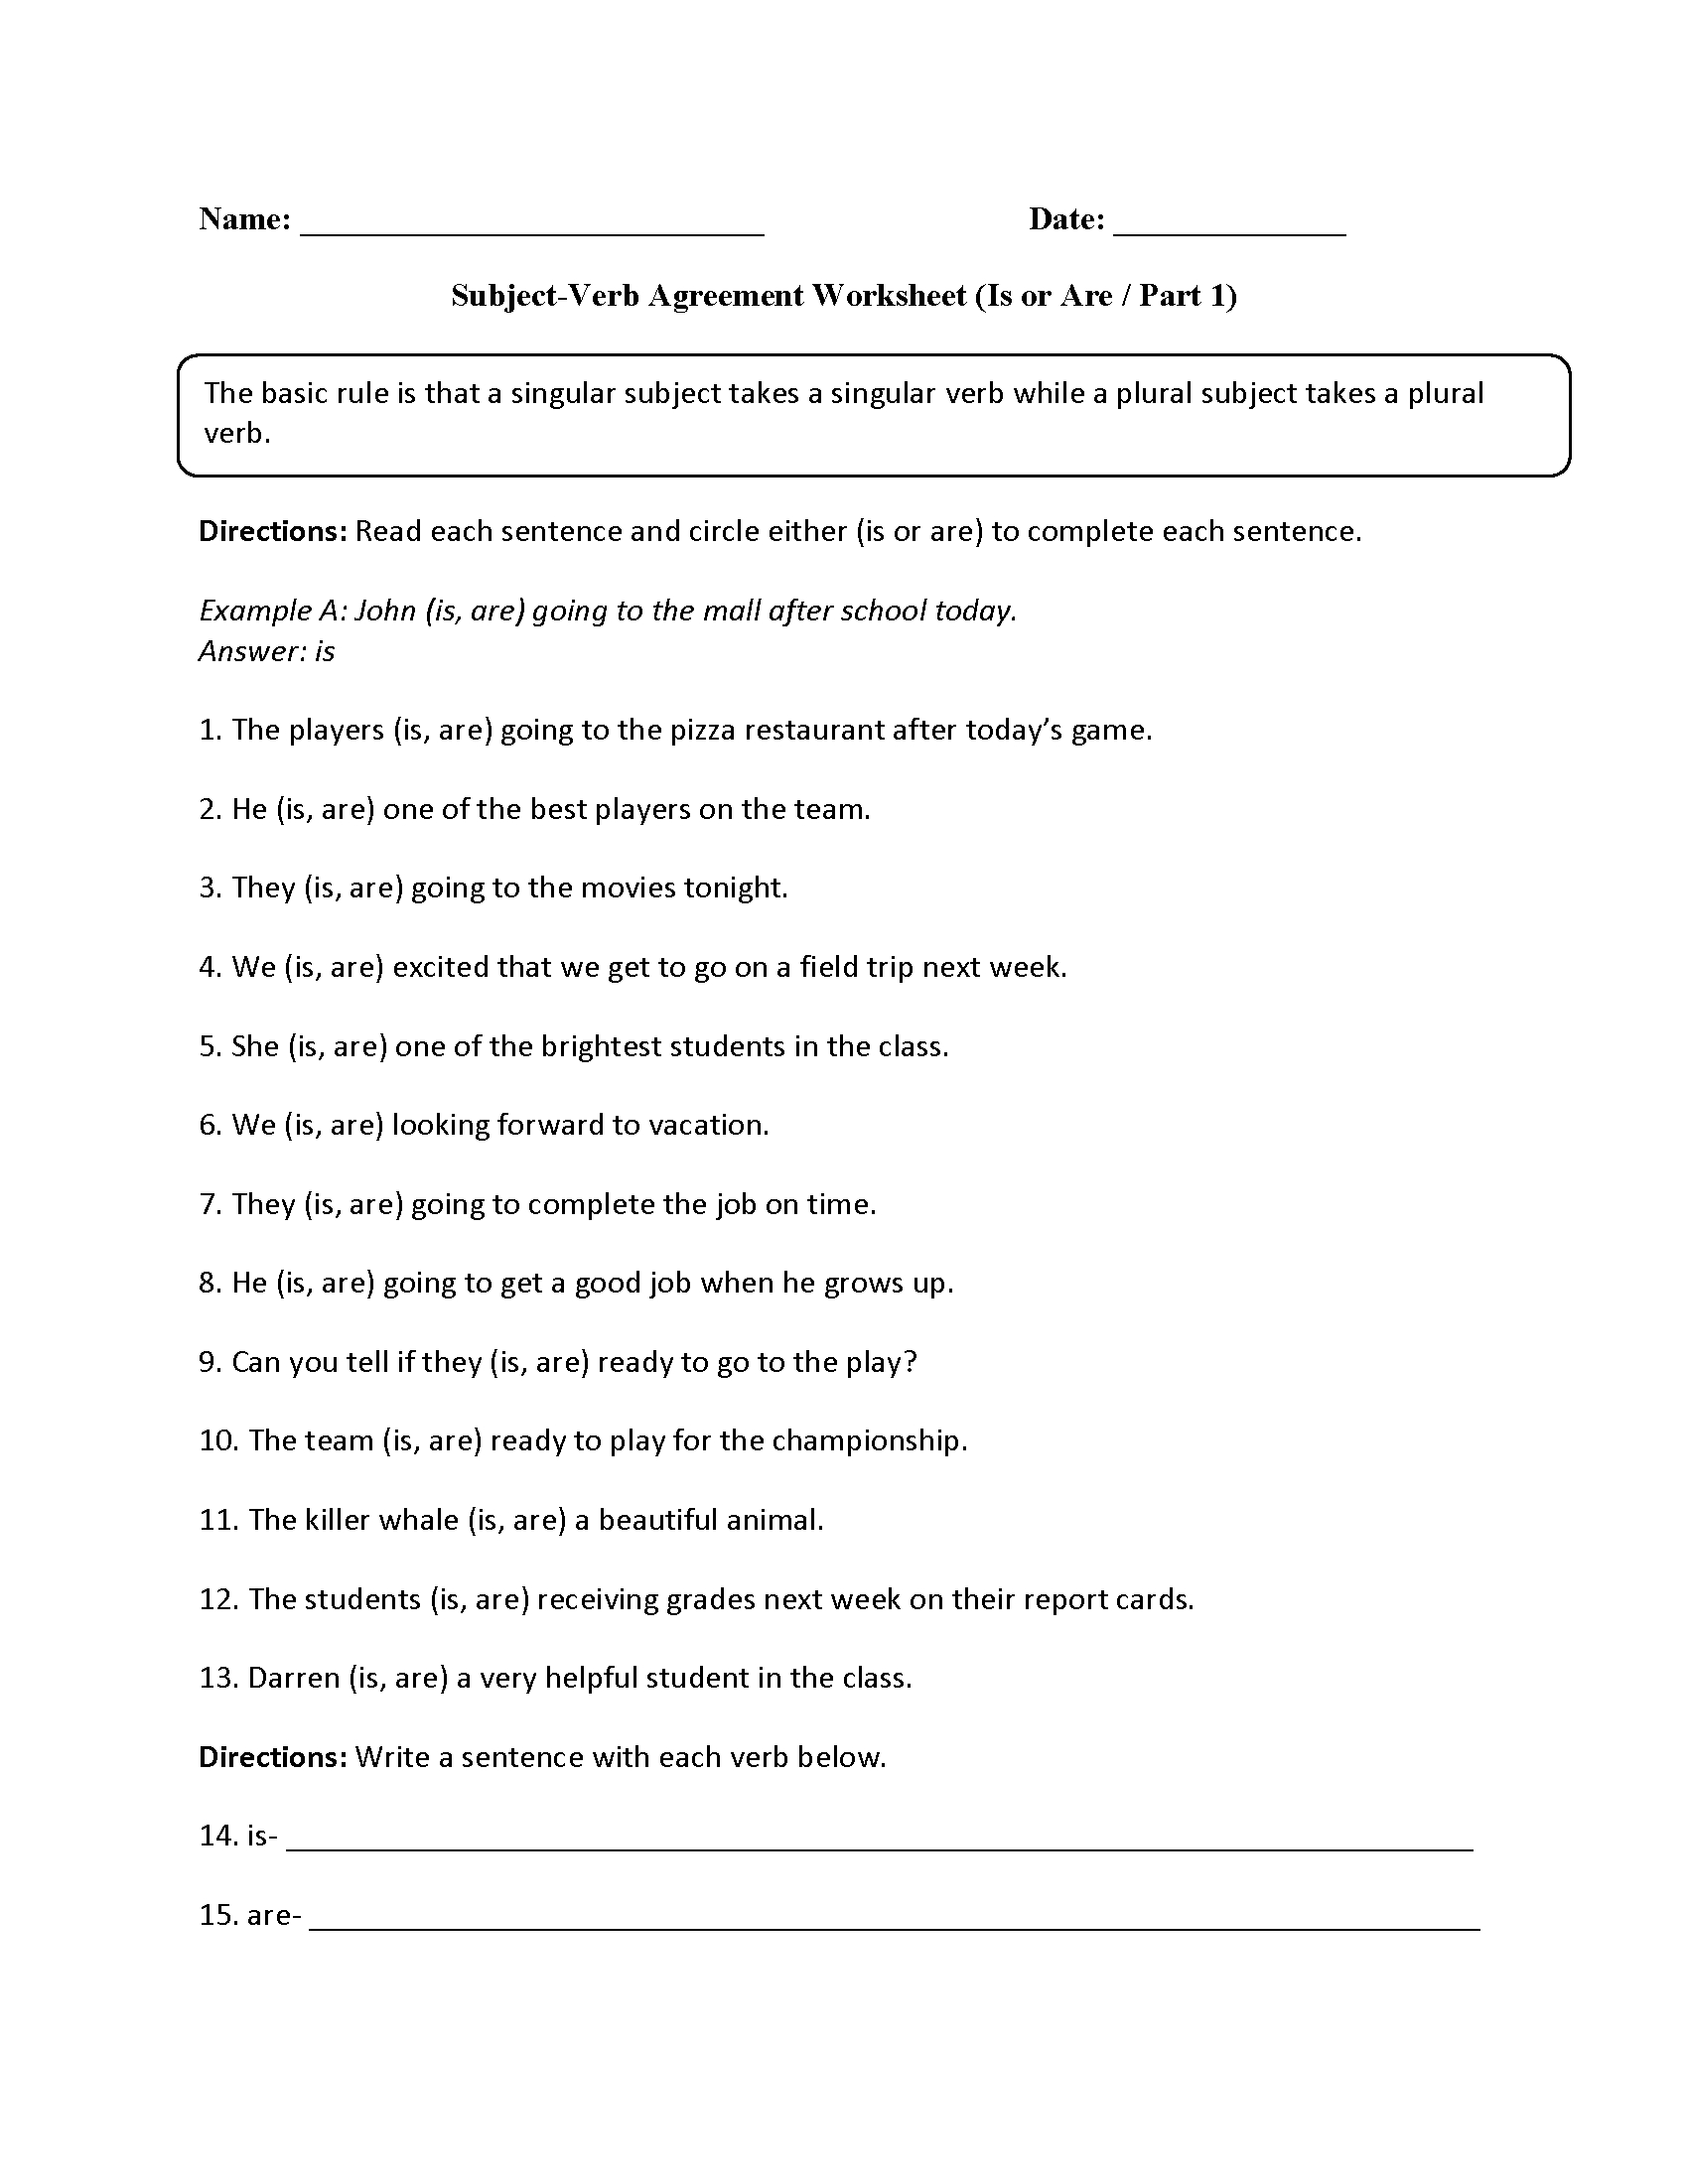 Verbs Worksheets | Subject Verb Agreement Worksheets | Free Printable Subject Verb Agreement Worksheets